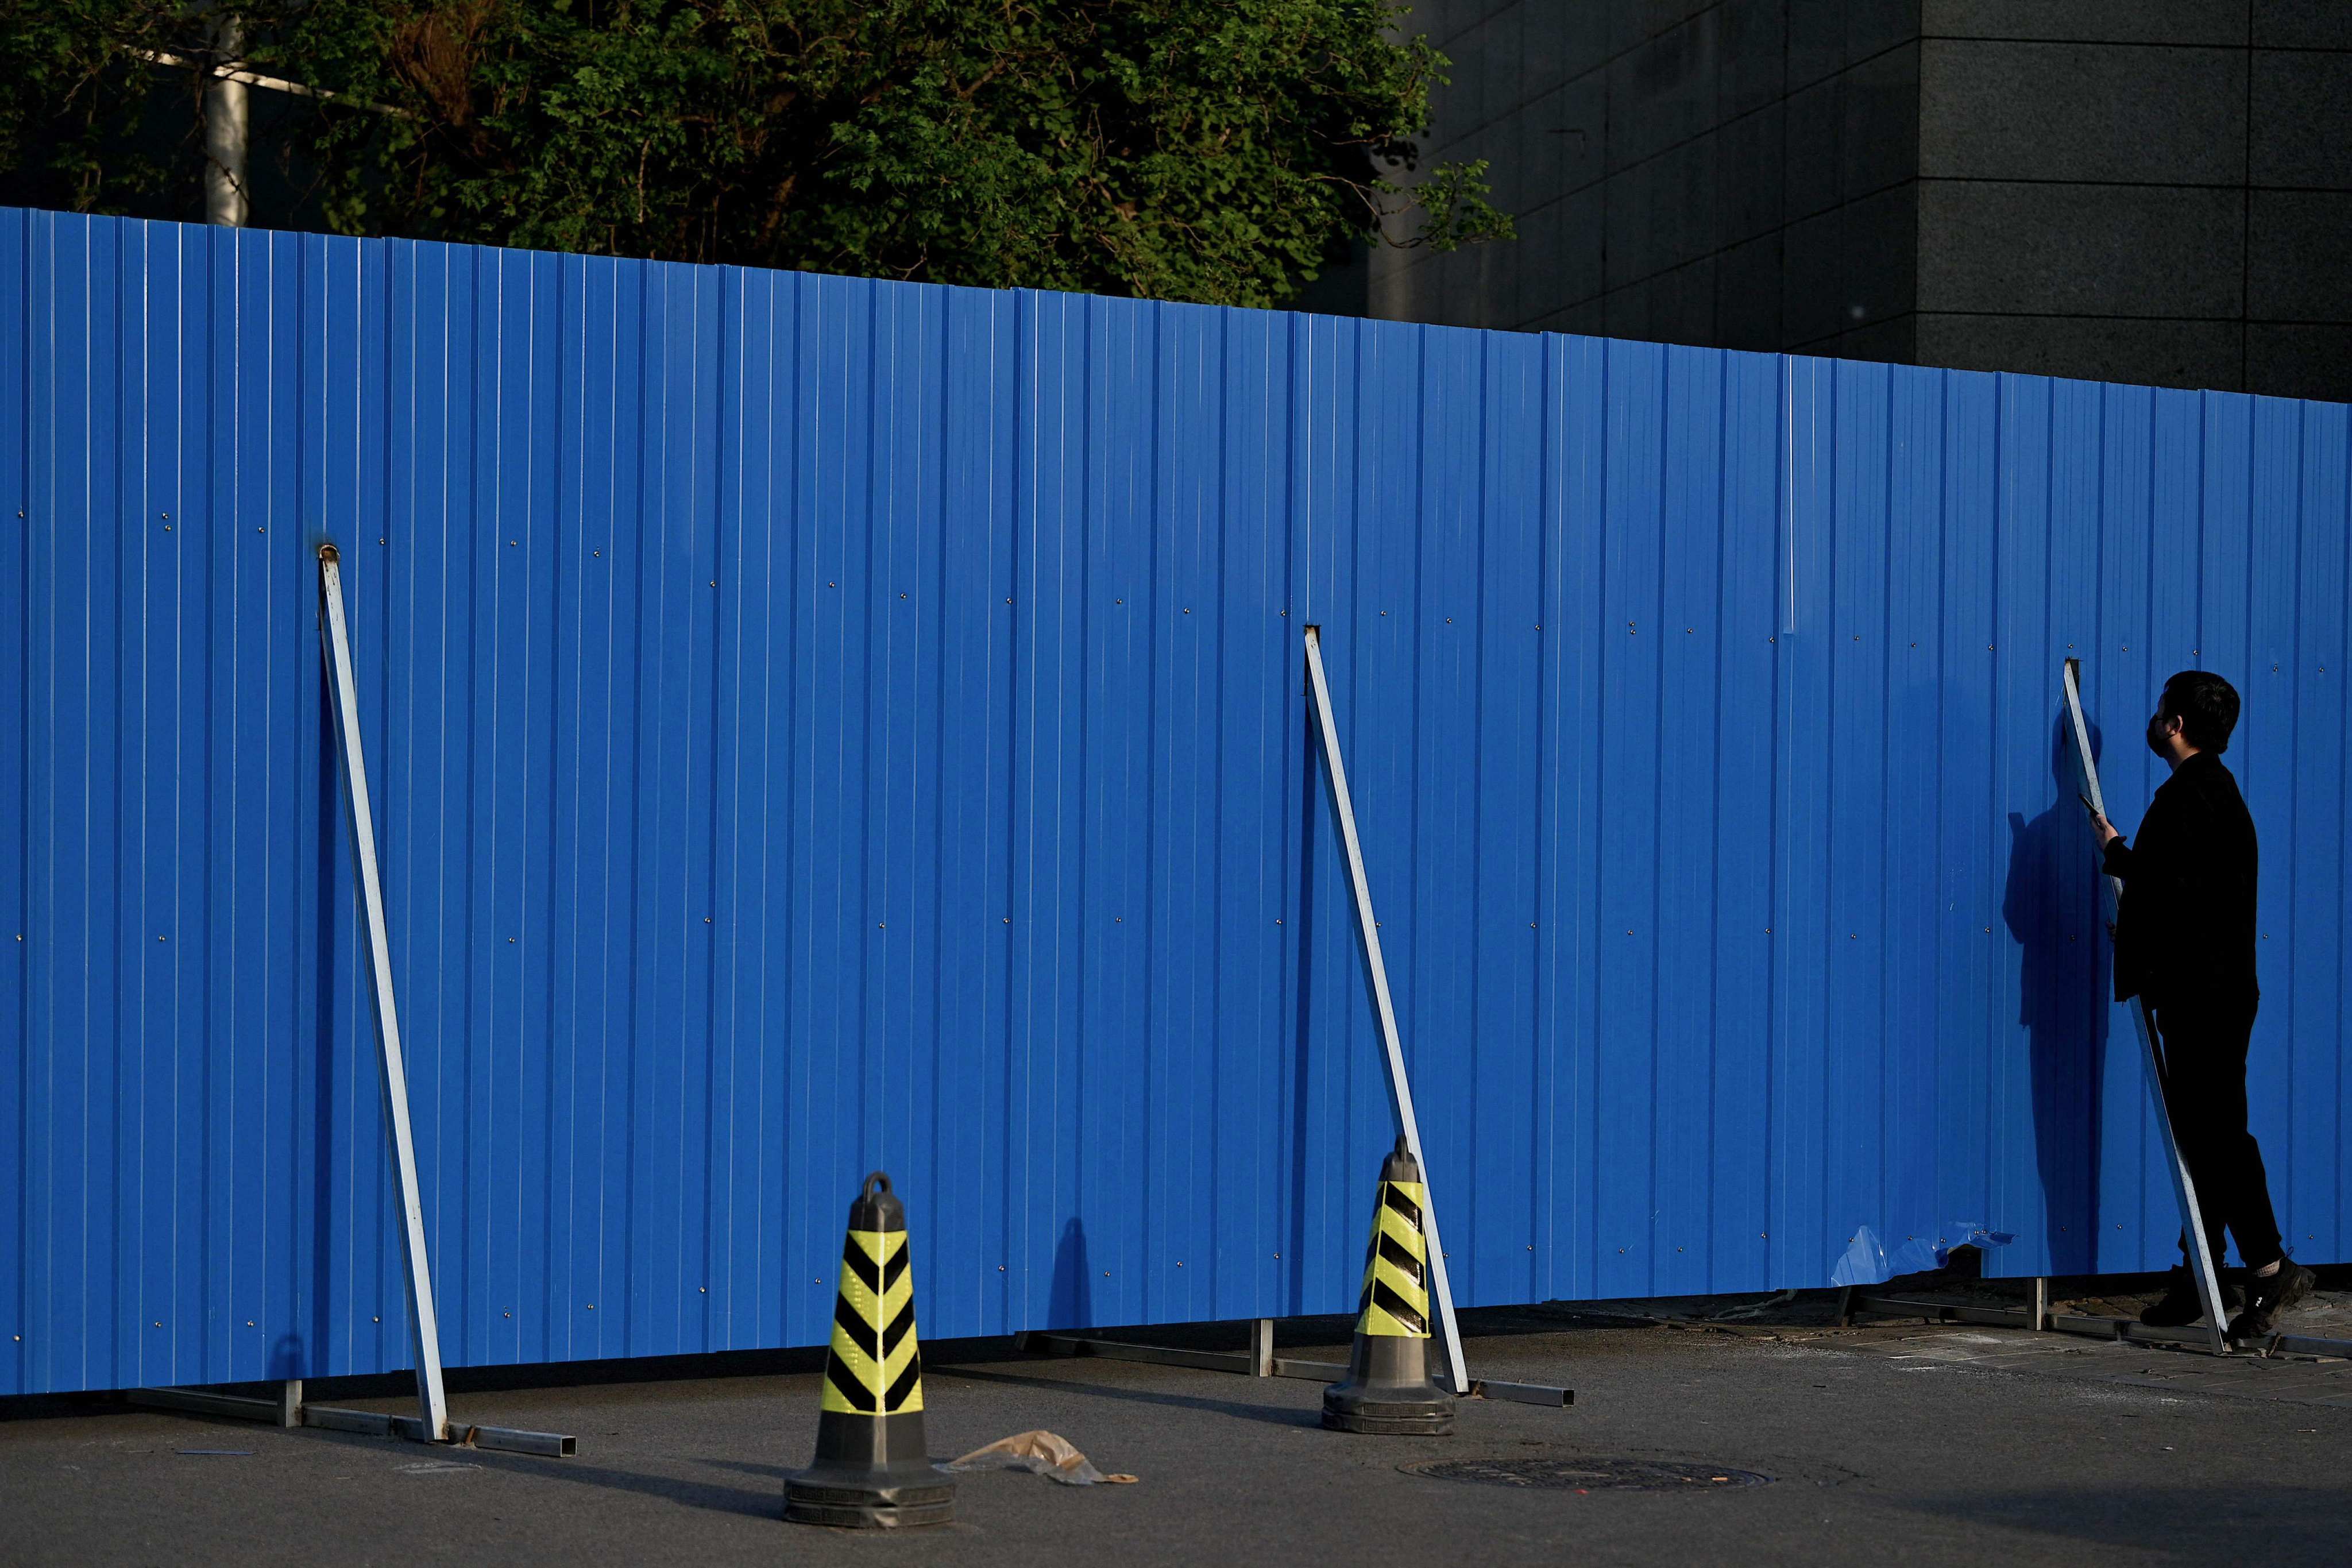 A man talks to a resident confined in a fenced residential area under lockdown due to Covid-19 restrictions in Beijing, on May 17. Photo: AFP